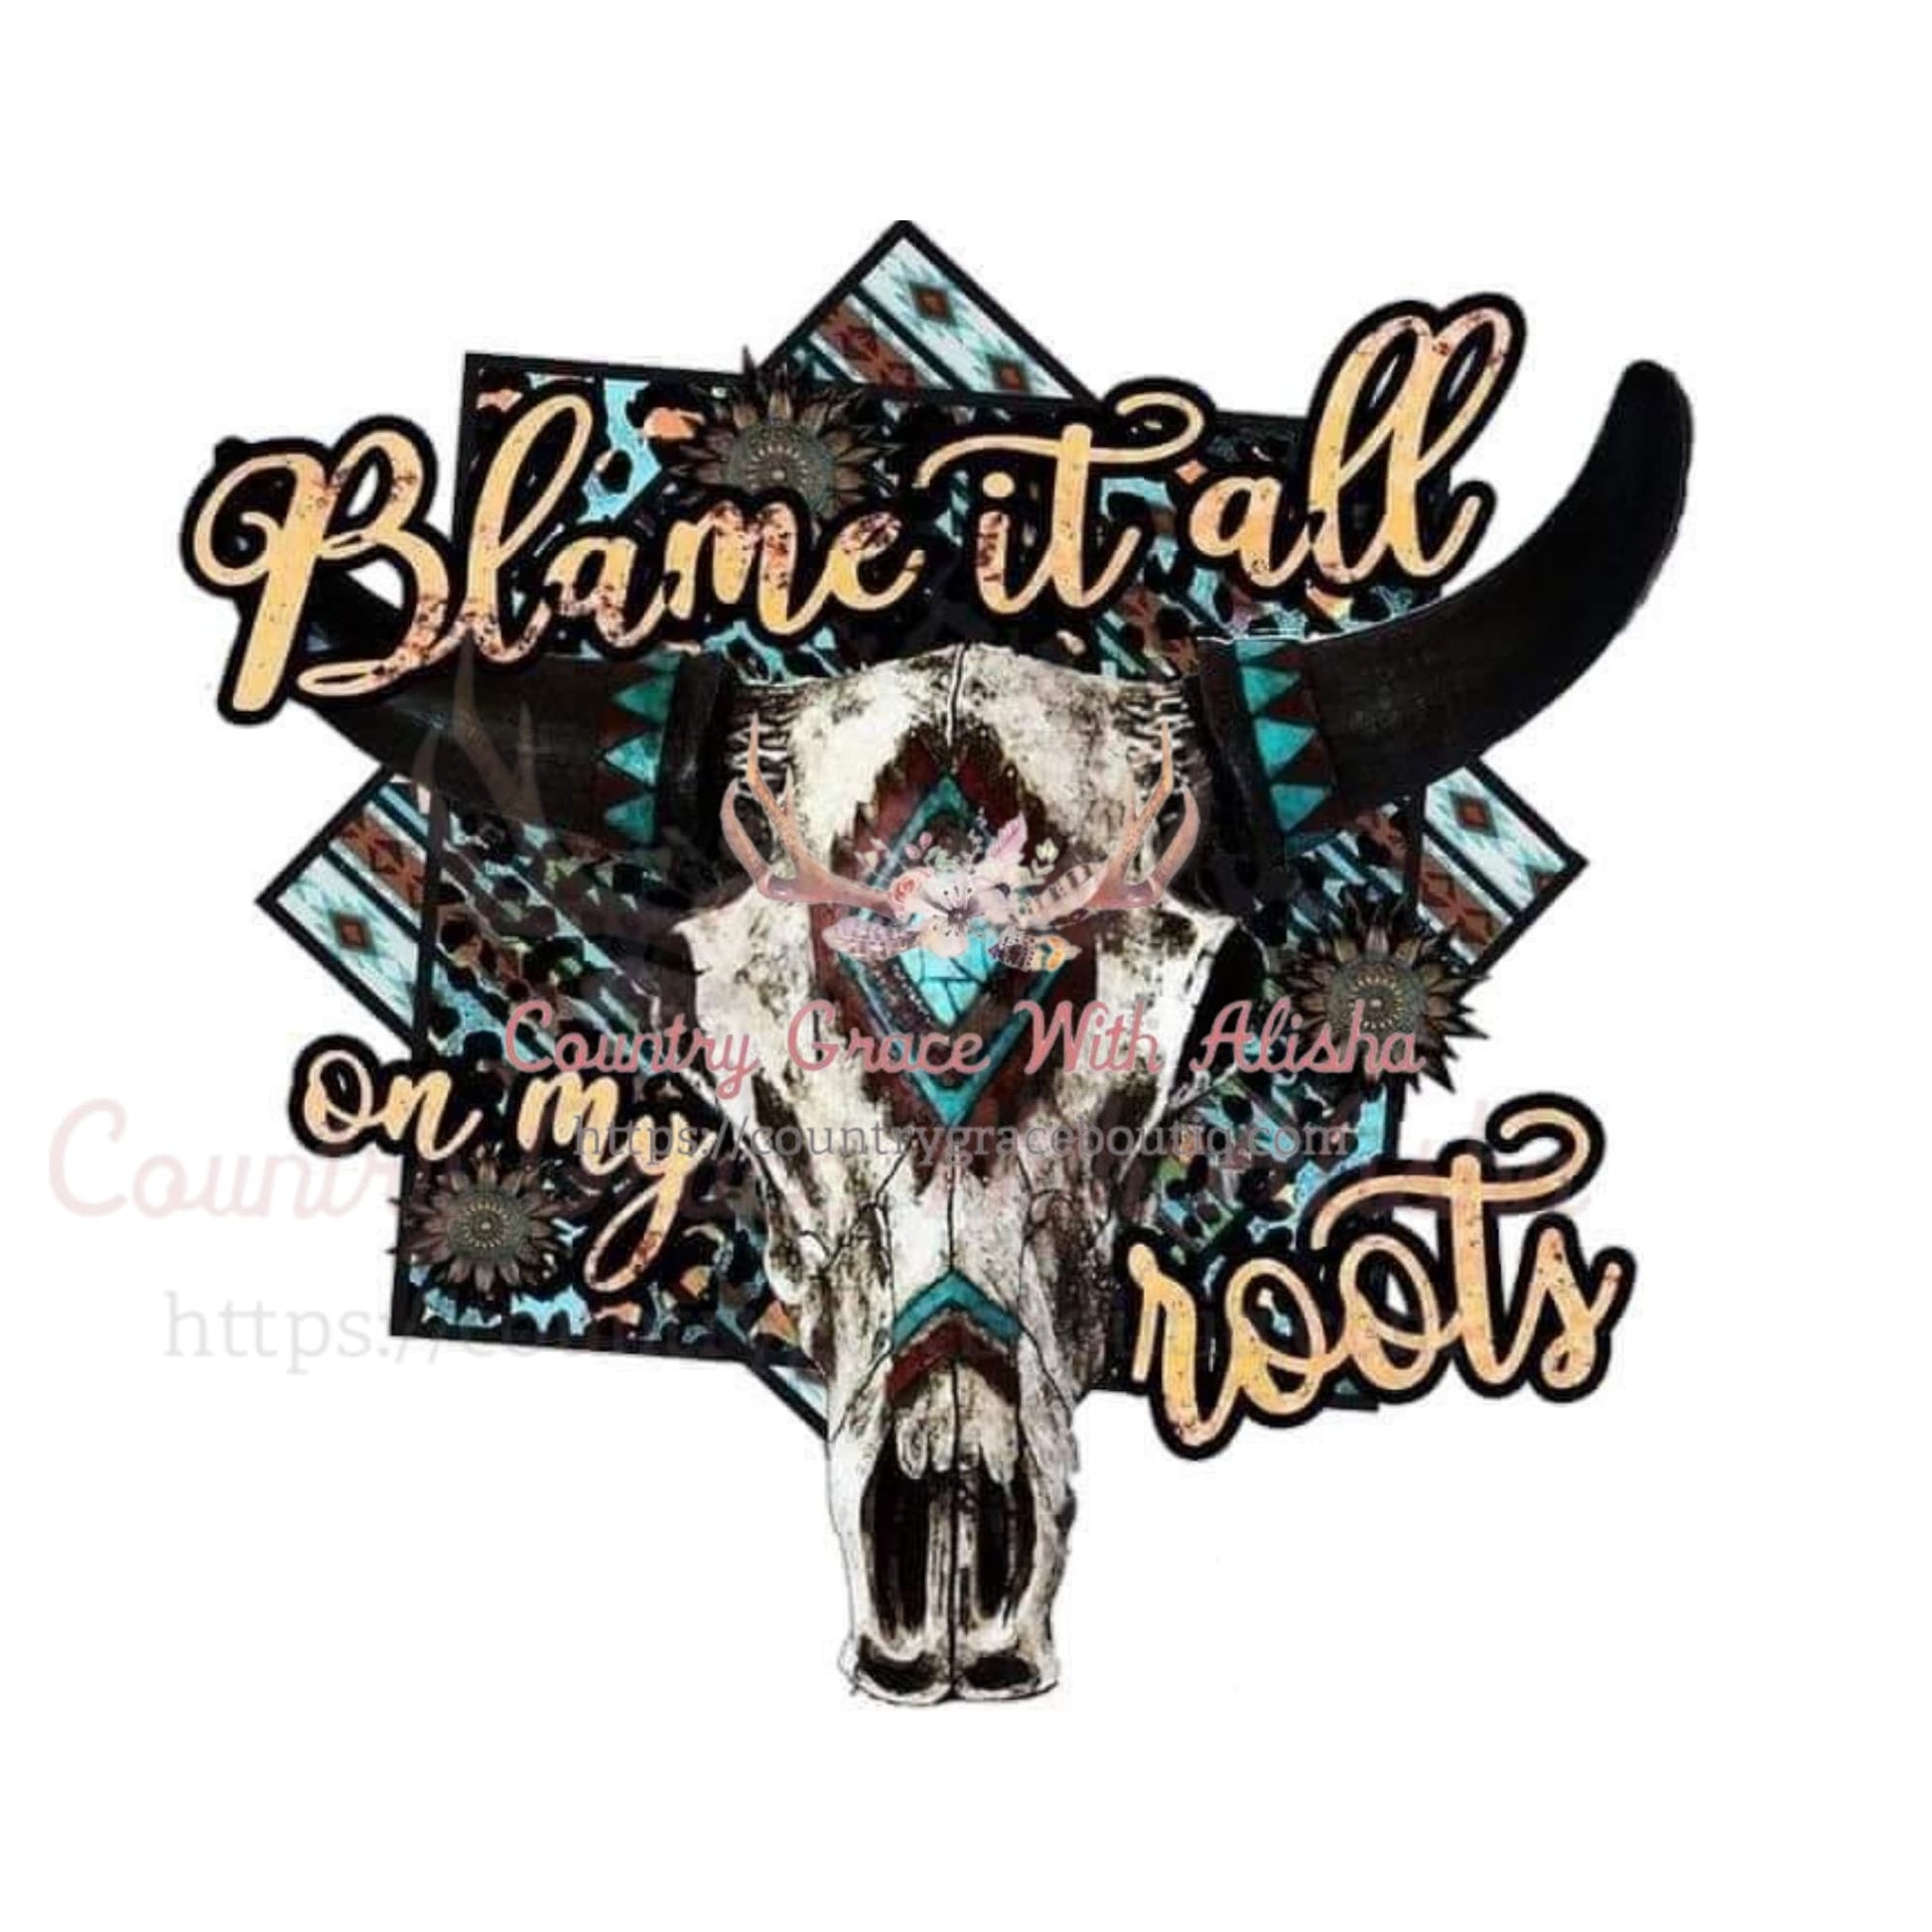 Blame It All On My Roots Sublimation Transfer - Sub $1.50 